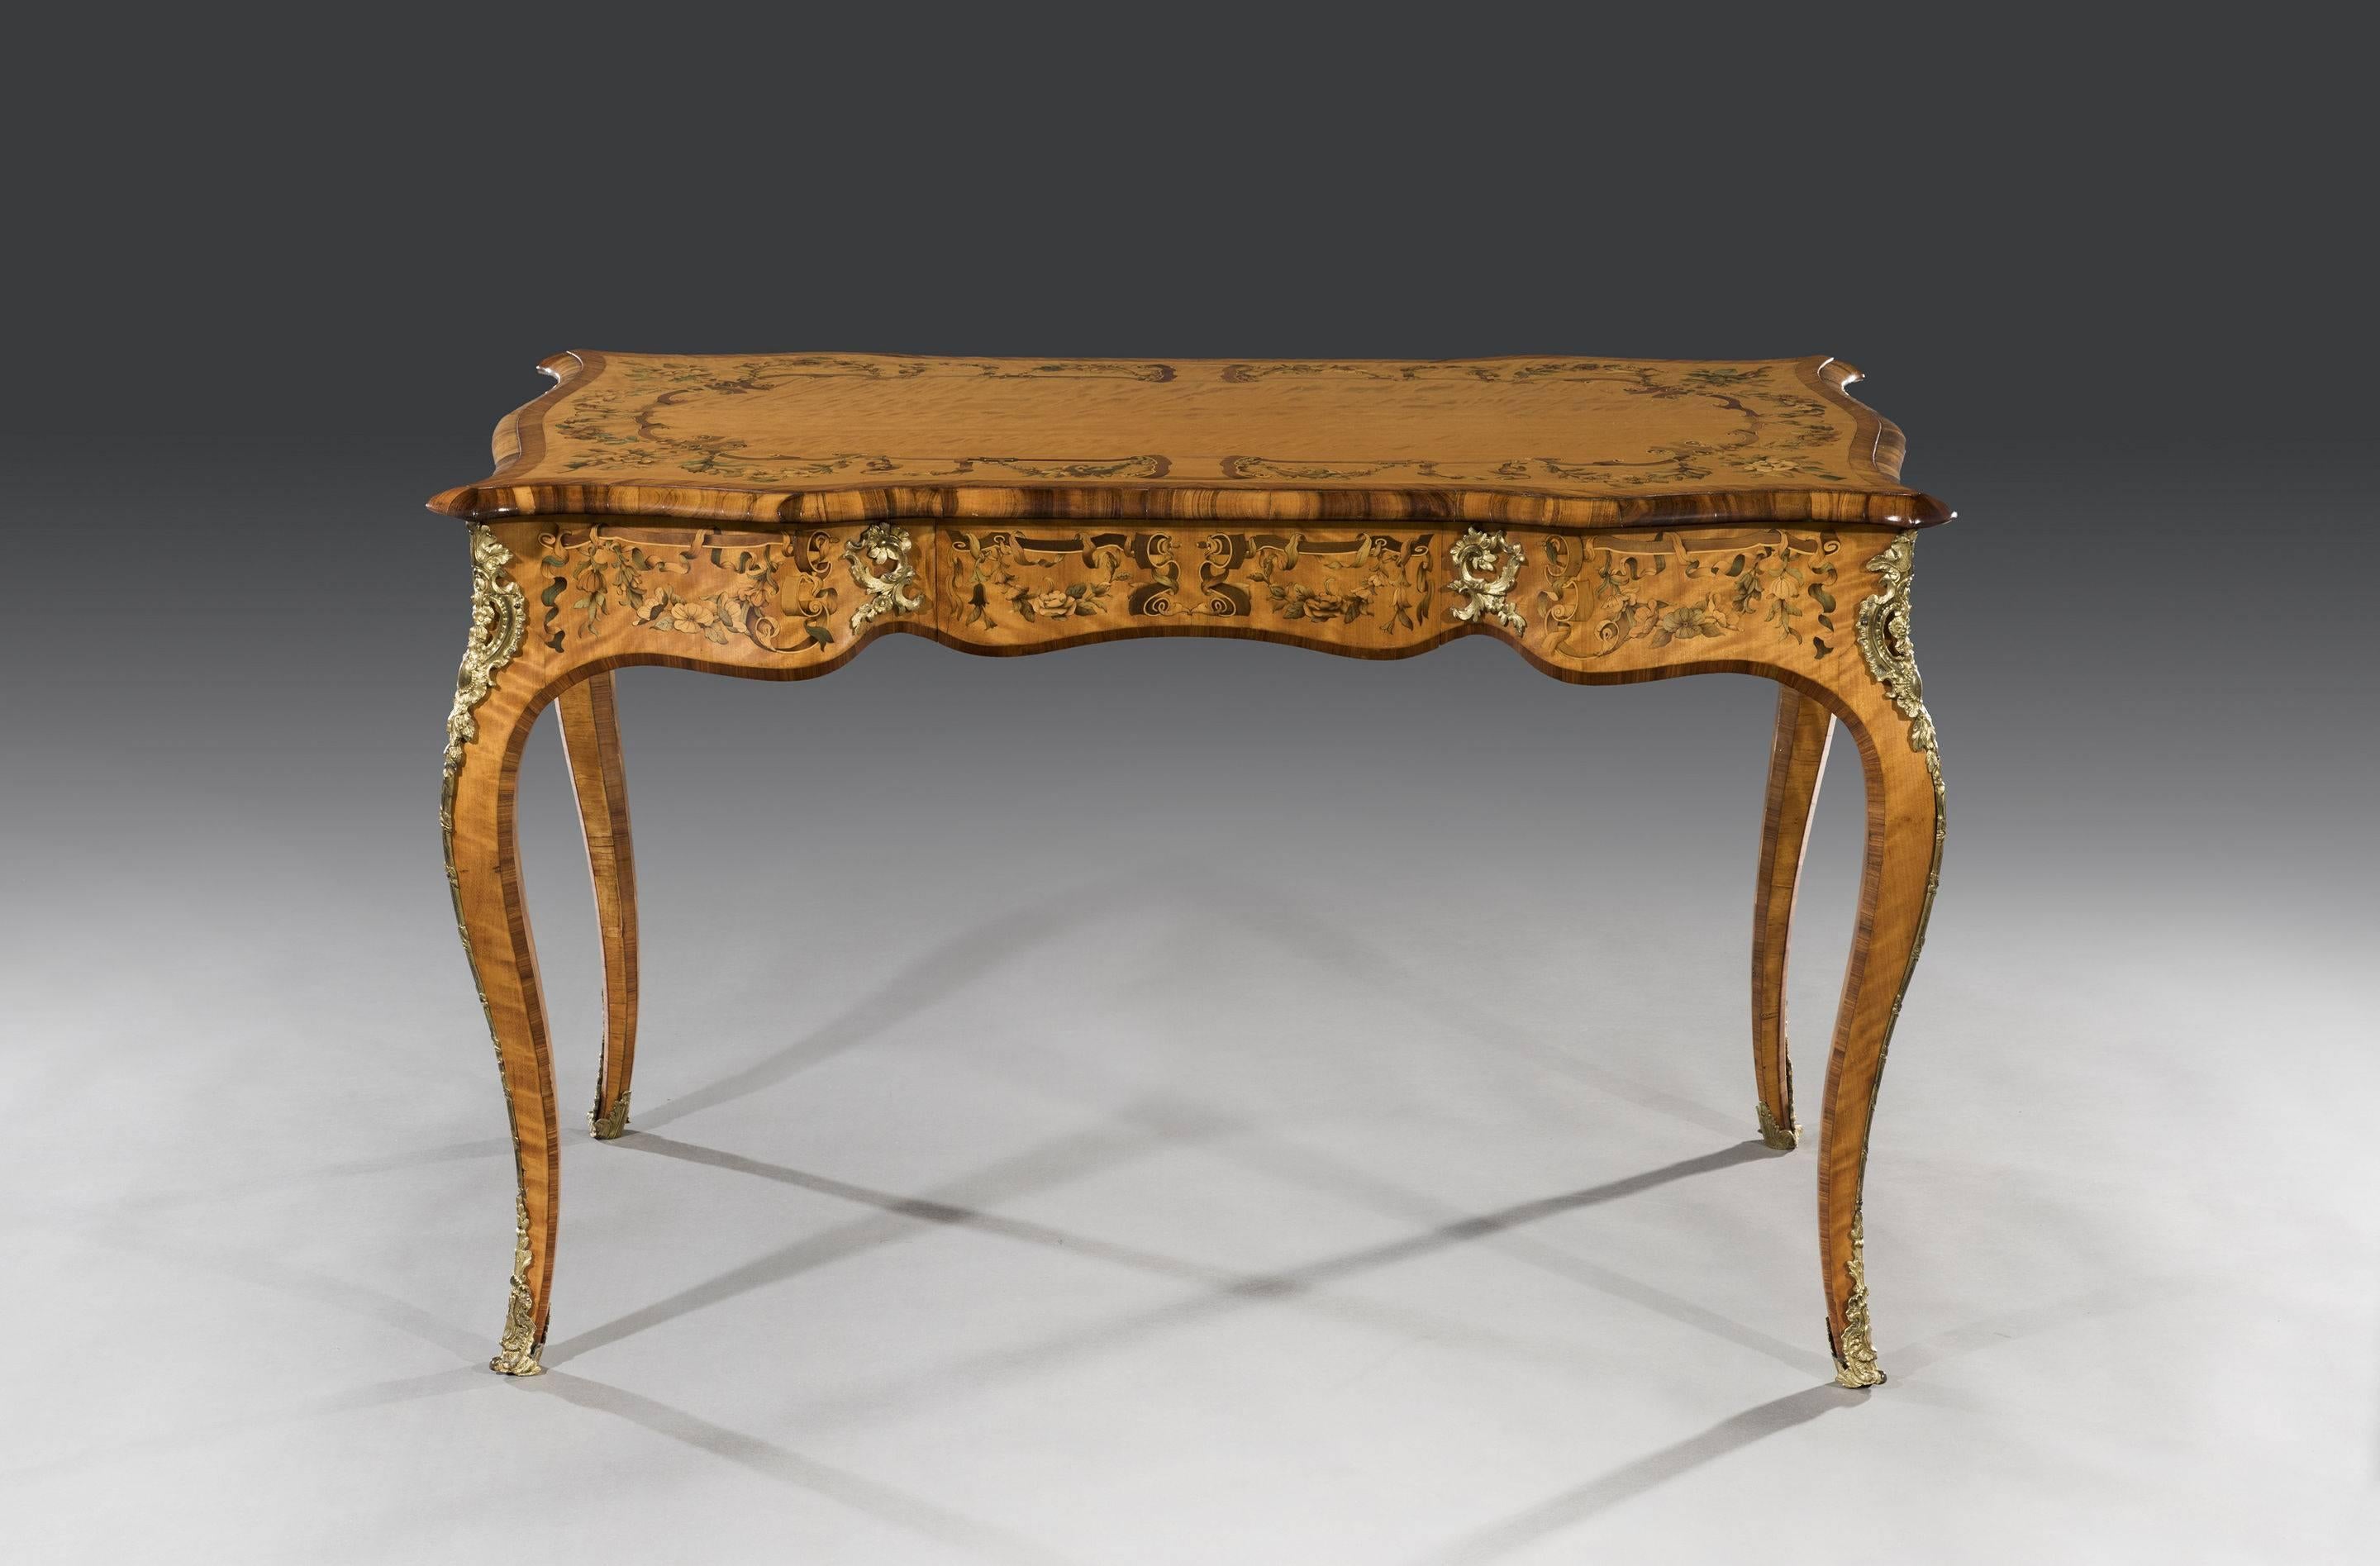 The book-matched veneered satinwood top with serpentine sides and canted corners is adorned with stained floral marquetry designs with kingwood crossbanding and gonçalo alves mouldings. The gilt bronze mounts fitted to the marquetry decorated